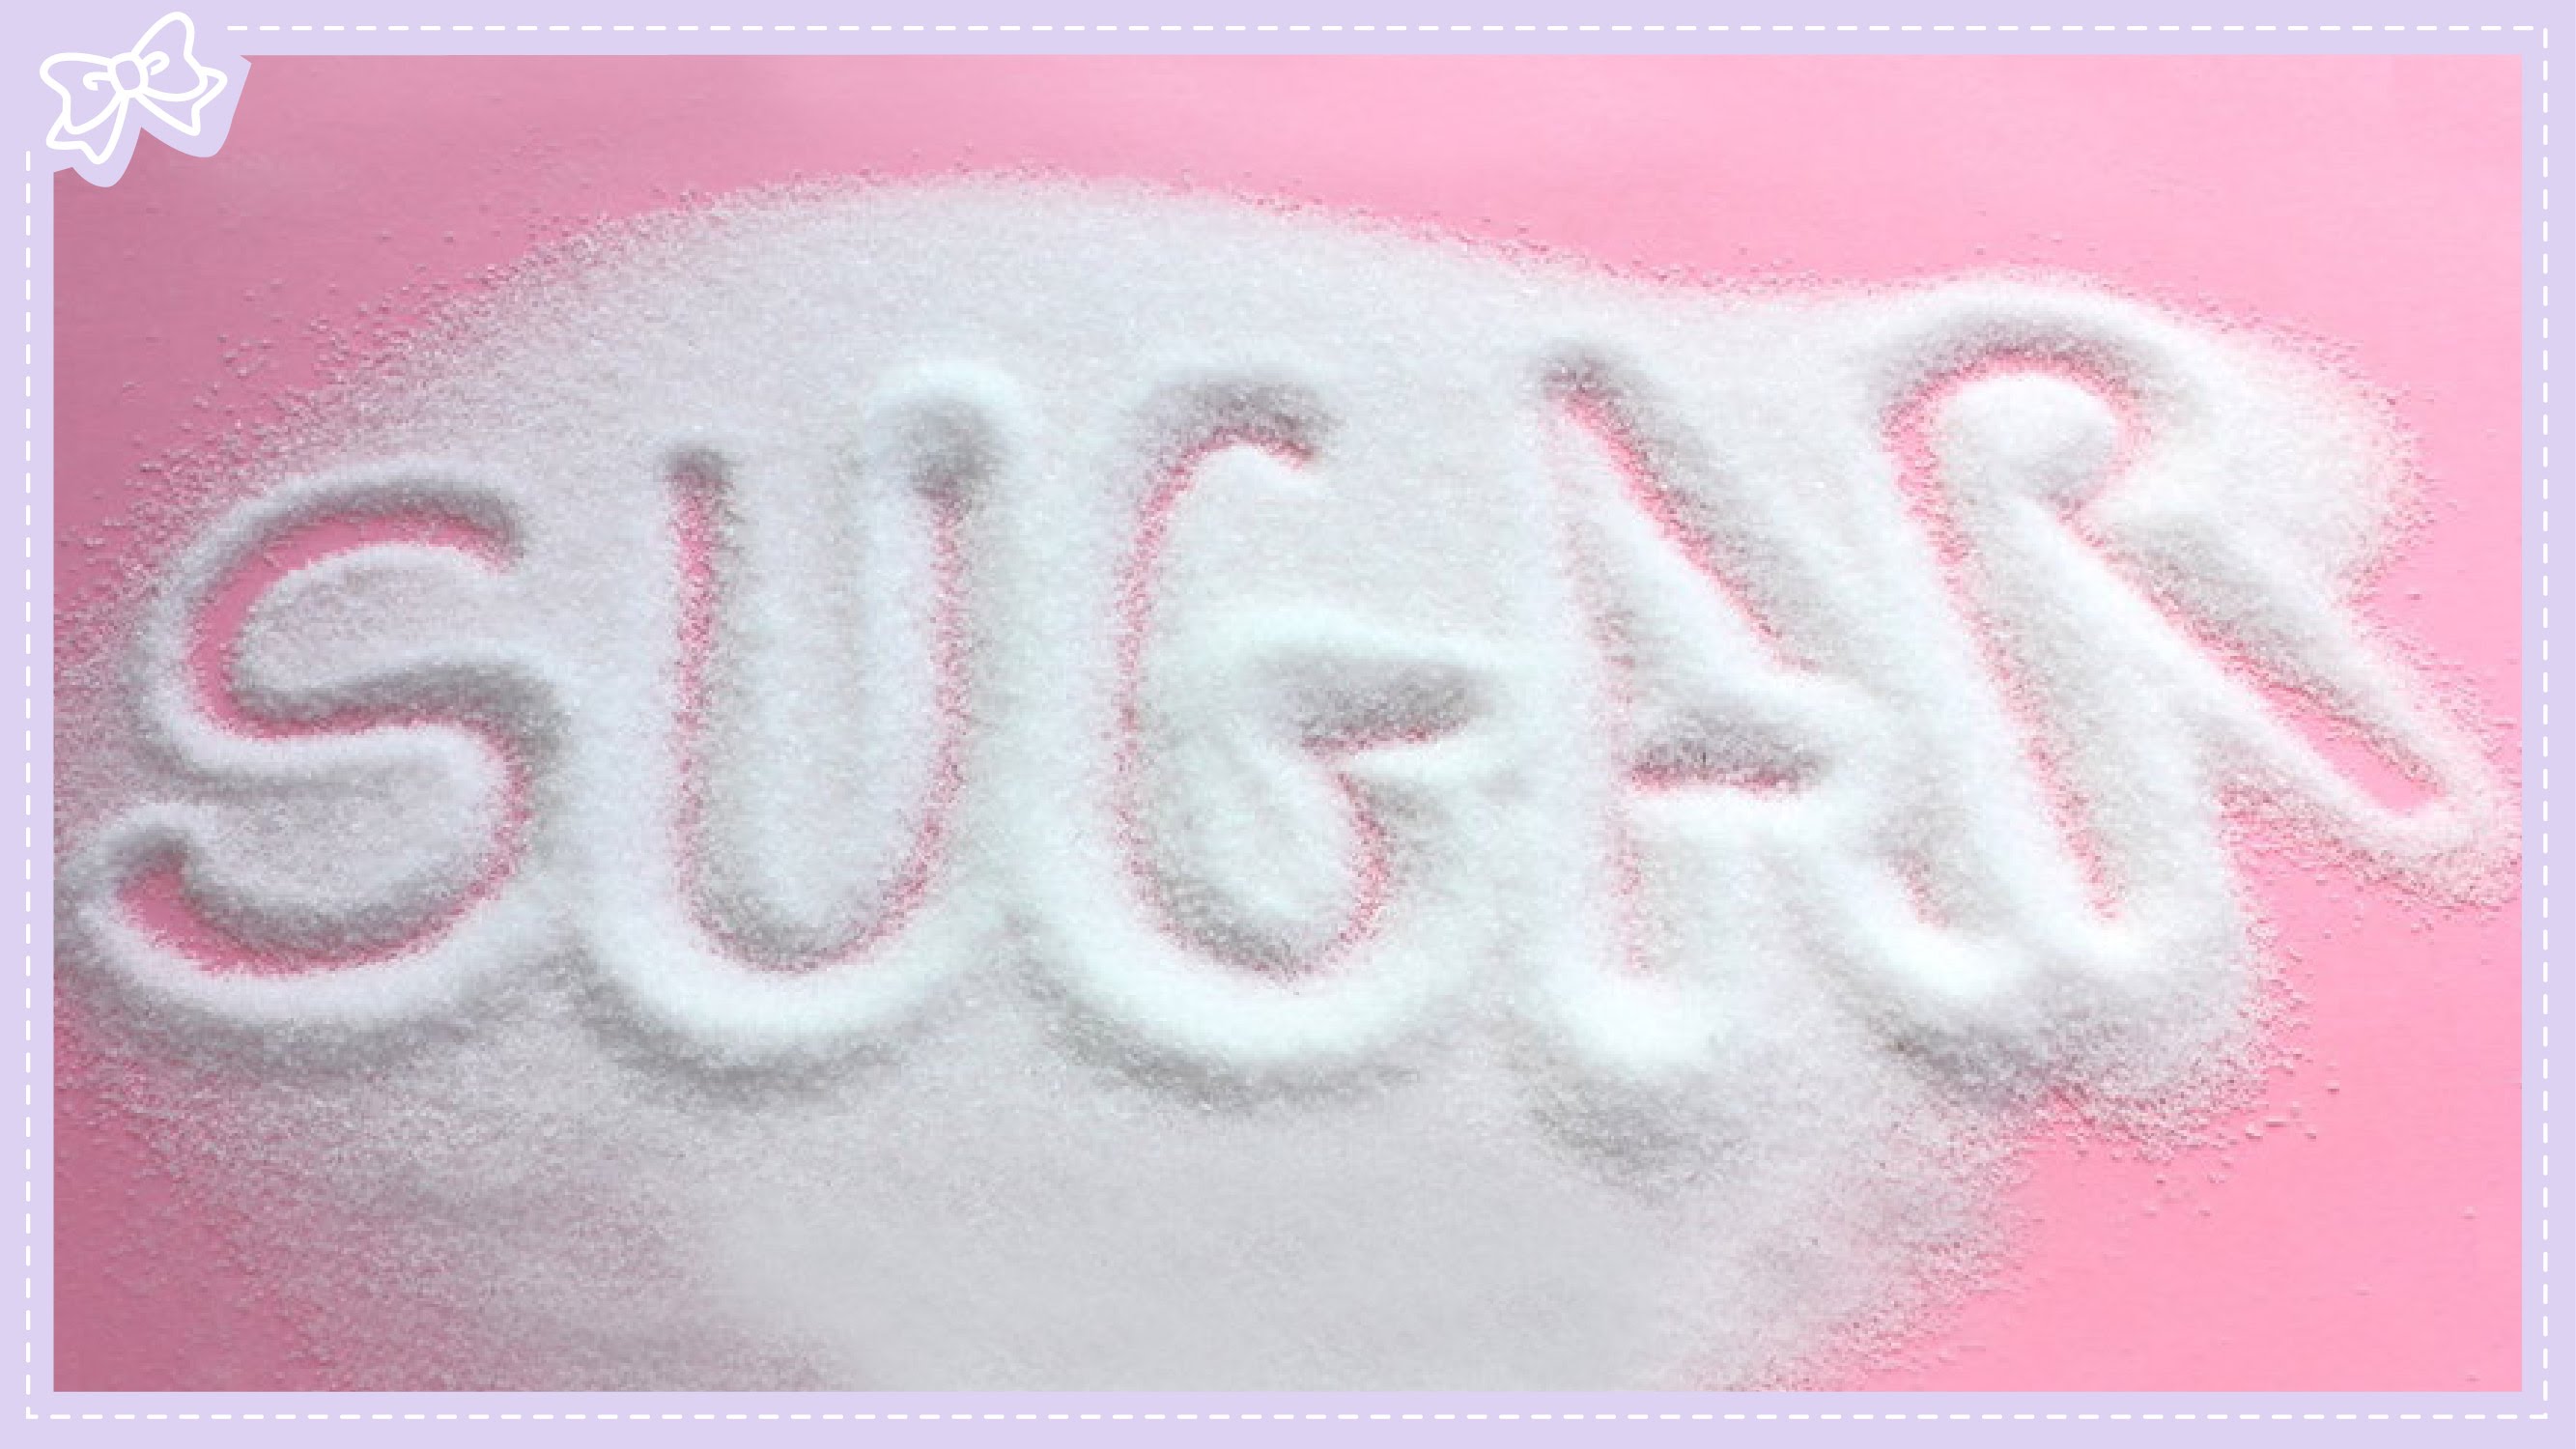 How to get rid of Sugar Cravings and Sugar Addiction? - YouTube